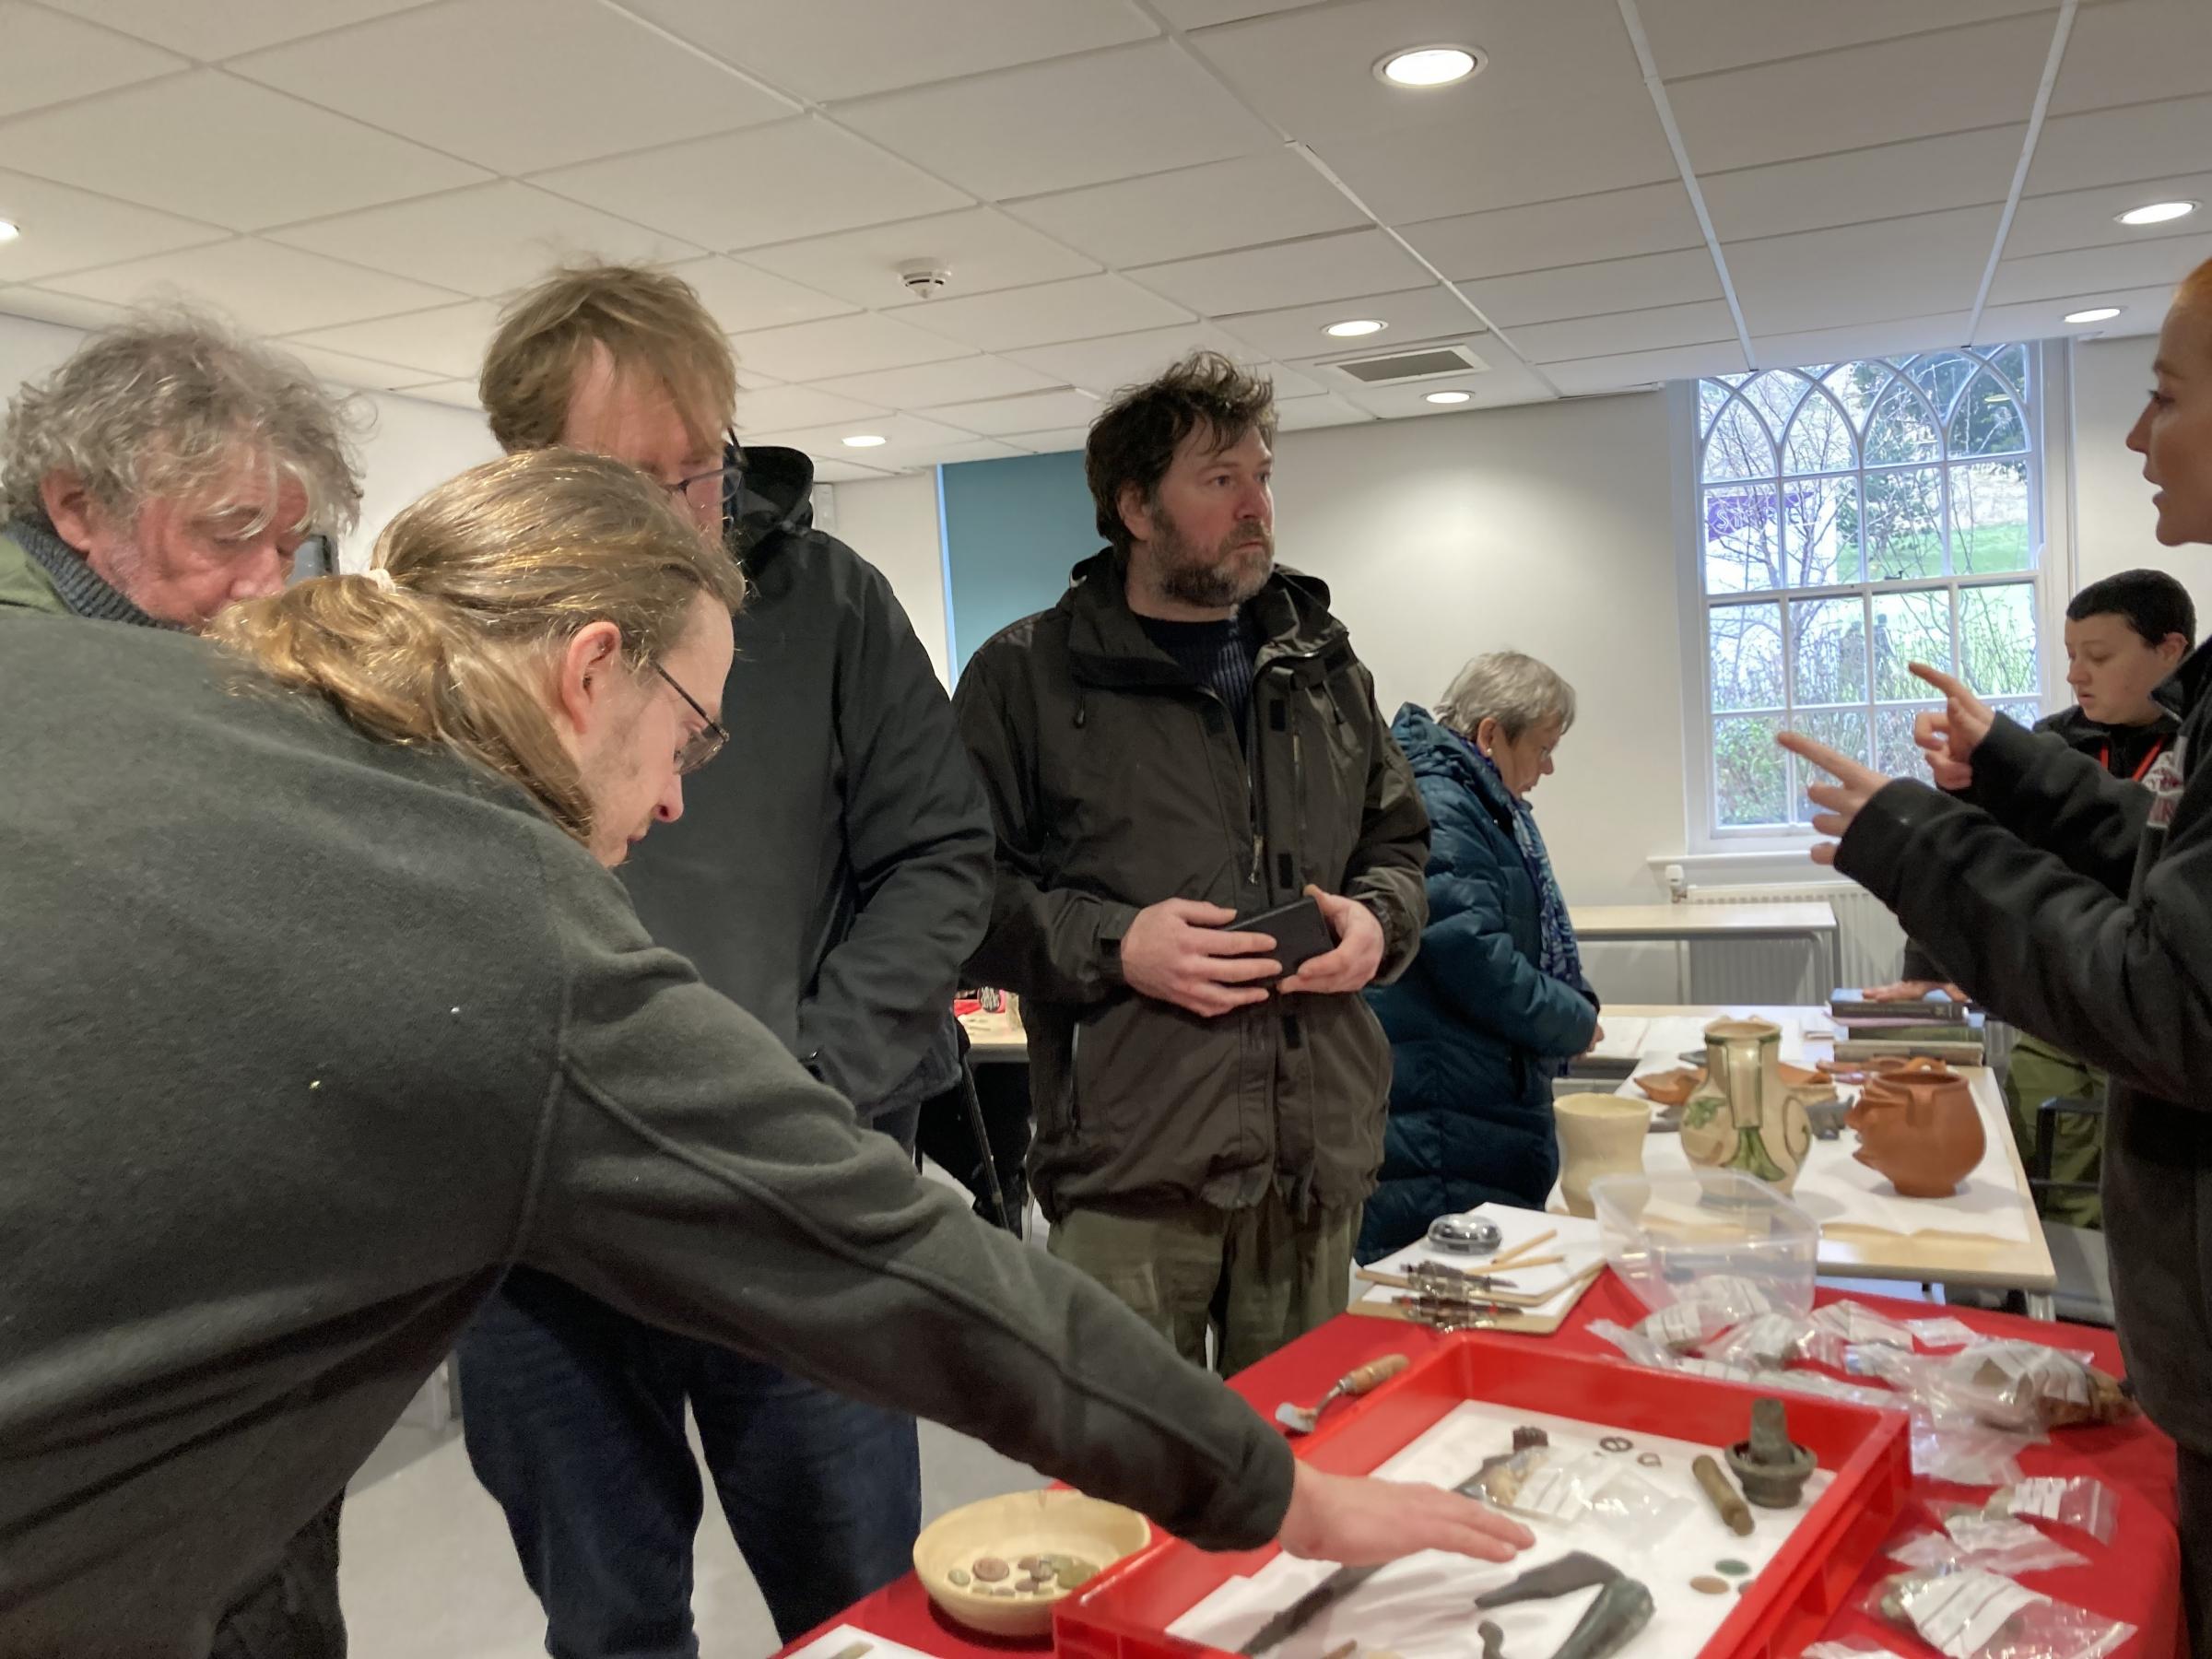 Dr David Howell and Pas Cymru representatives talk to the public about the finds at Bangor\s Storiel museum pop-up event Image Dale Spridgeon